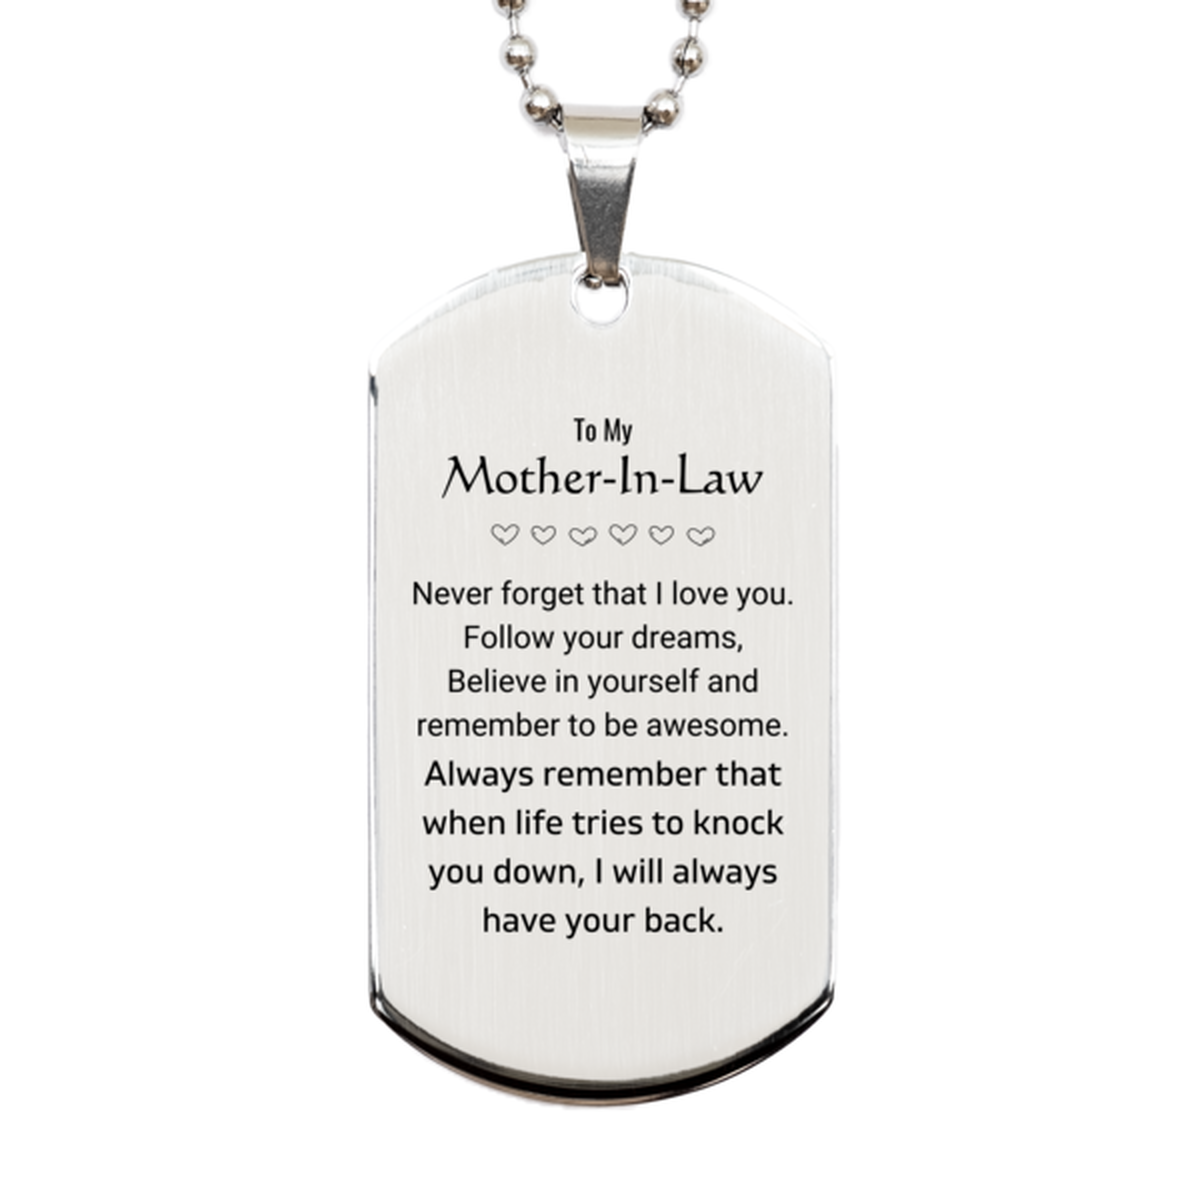 Inspirational Gifts for Mother-In-Law, Follow your dreams, Believe in yourself, Mother-In-Law Silver Dog Tag, Birthday Christmas Unique Gifts For Mother-In-Law